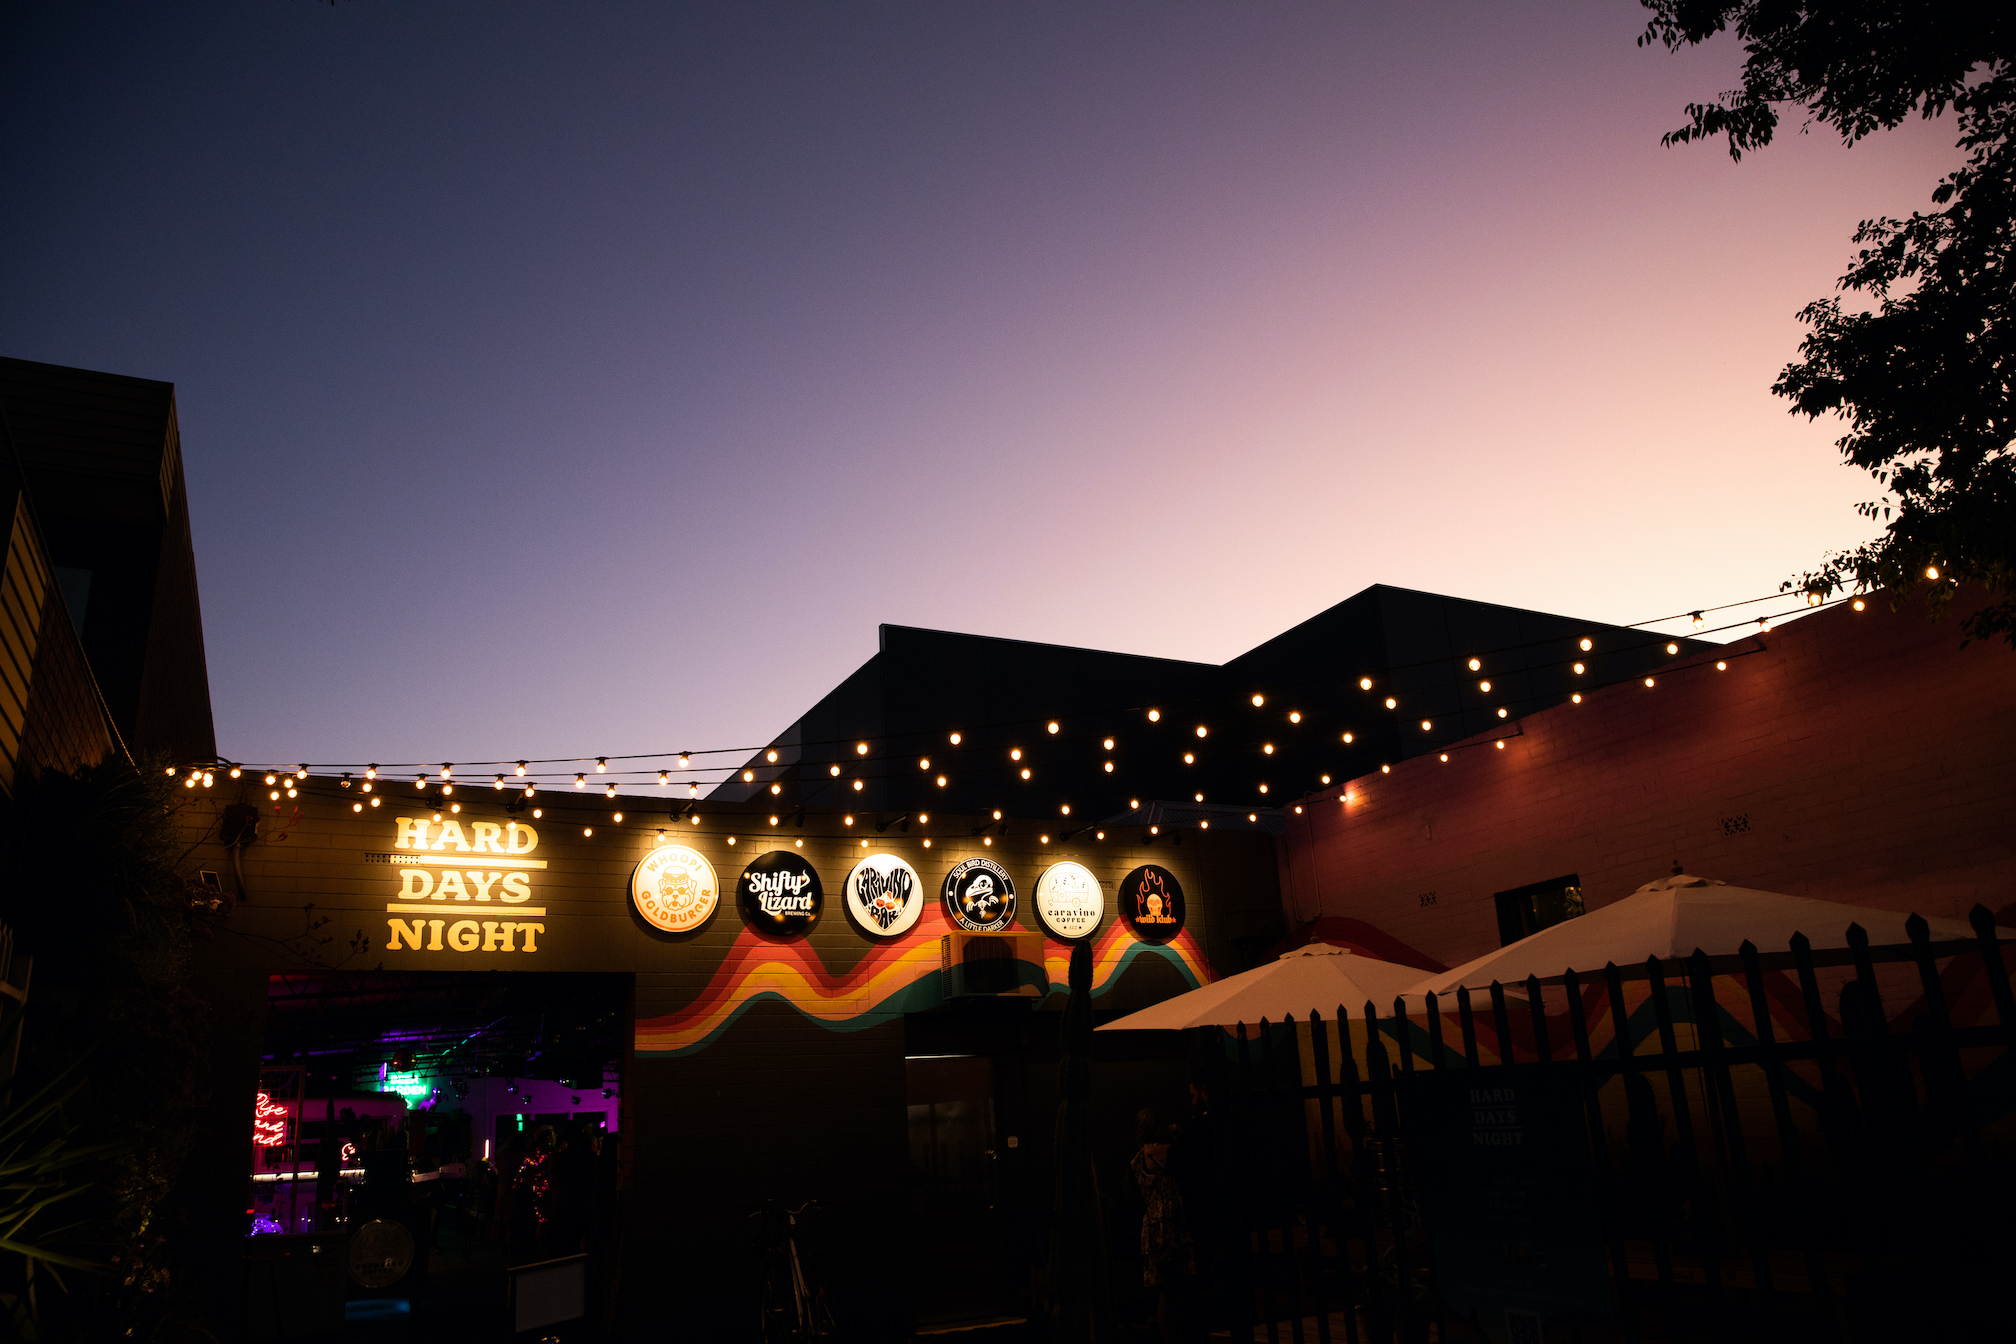 Hard Days Night is a hip urban wedding venue in the heart of the Adelaide CBD, with an eclectic collection of vans and bars all under the one roof offering beverage and catering options for a relaxed and alternative city wedding.